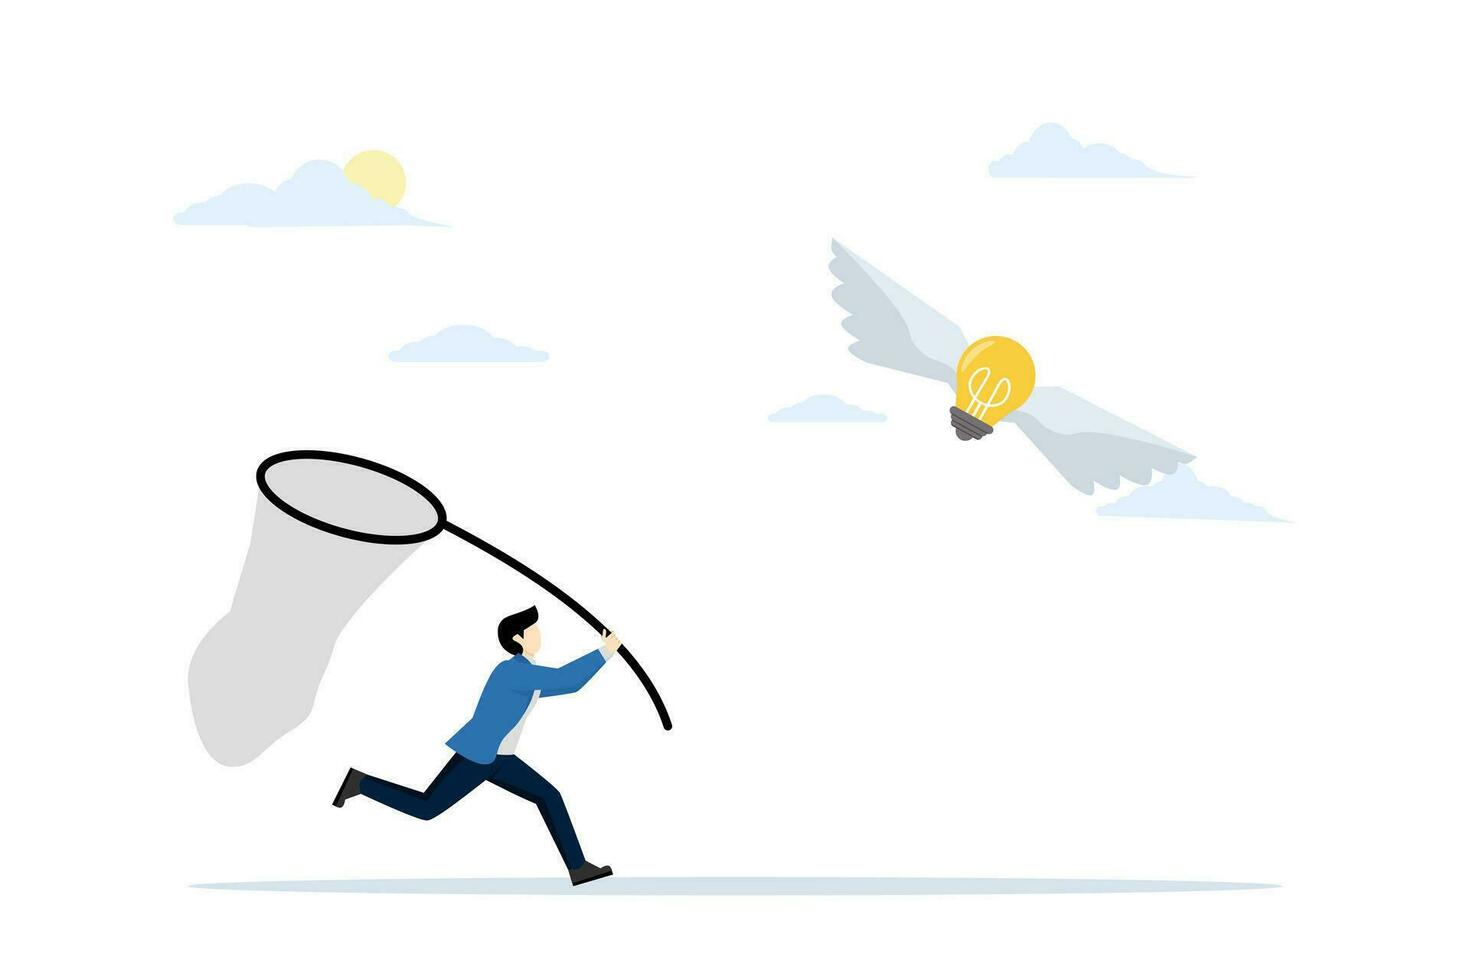 chasing flying idea or solution concept. Businessman trying to catch flying light bulb with spoon net. Get ideas. Flying idea. Flat vector illustration on a white background.